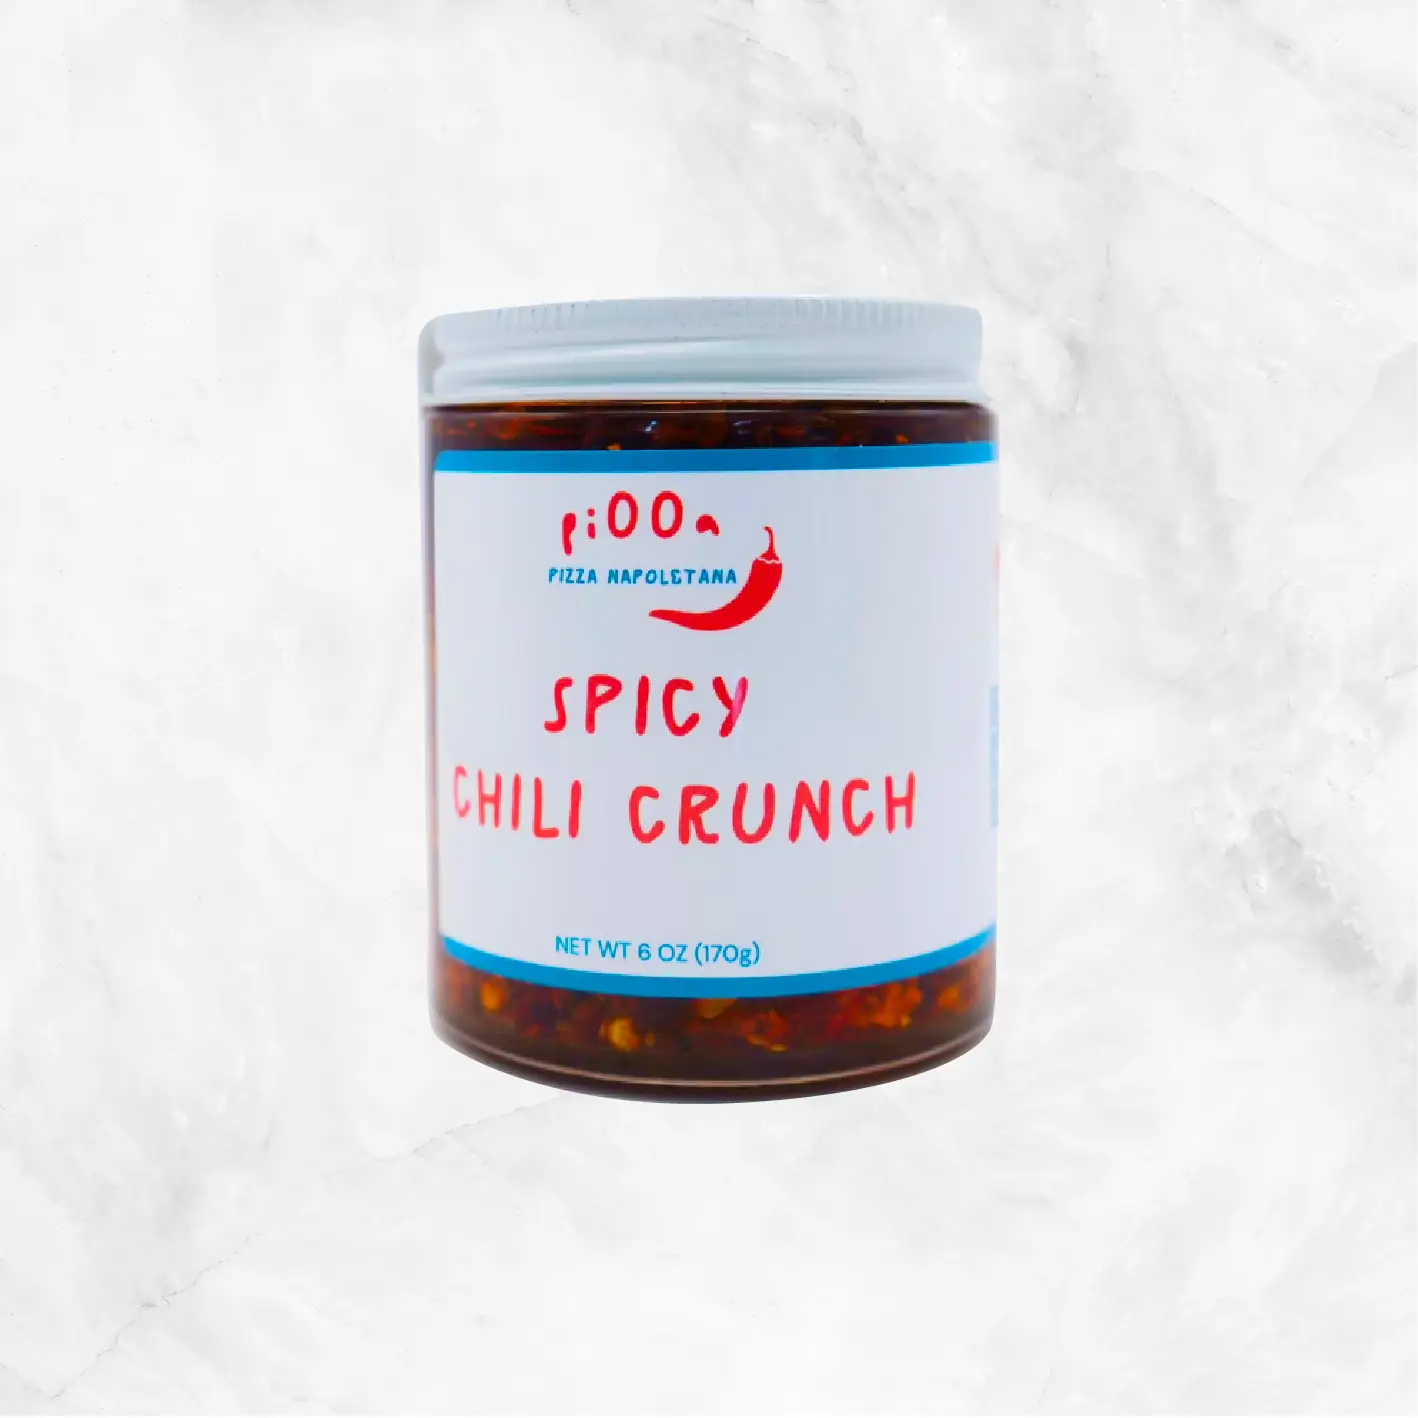 Spicy Chili Crunch Delivery